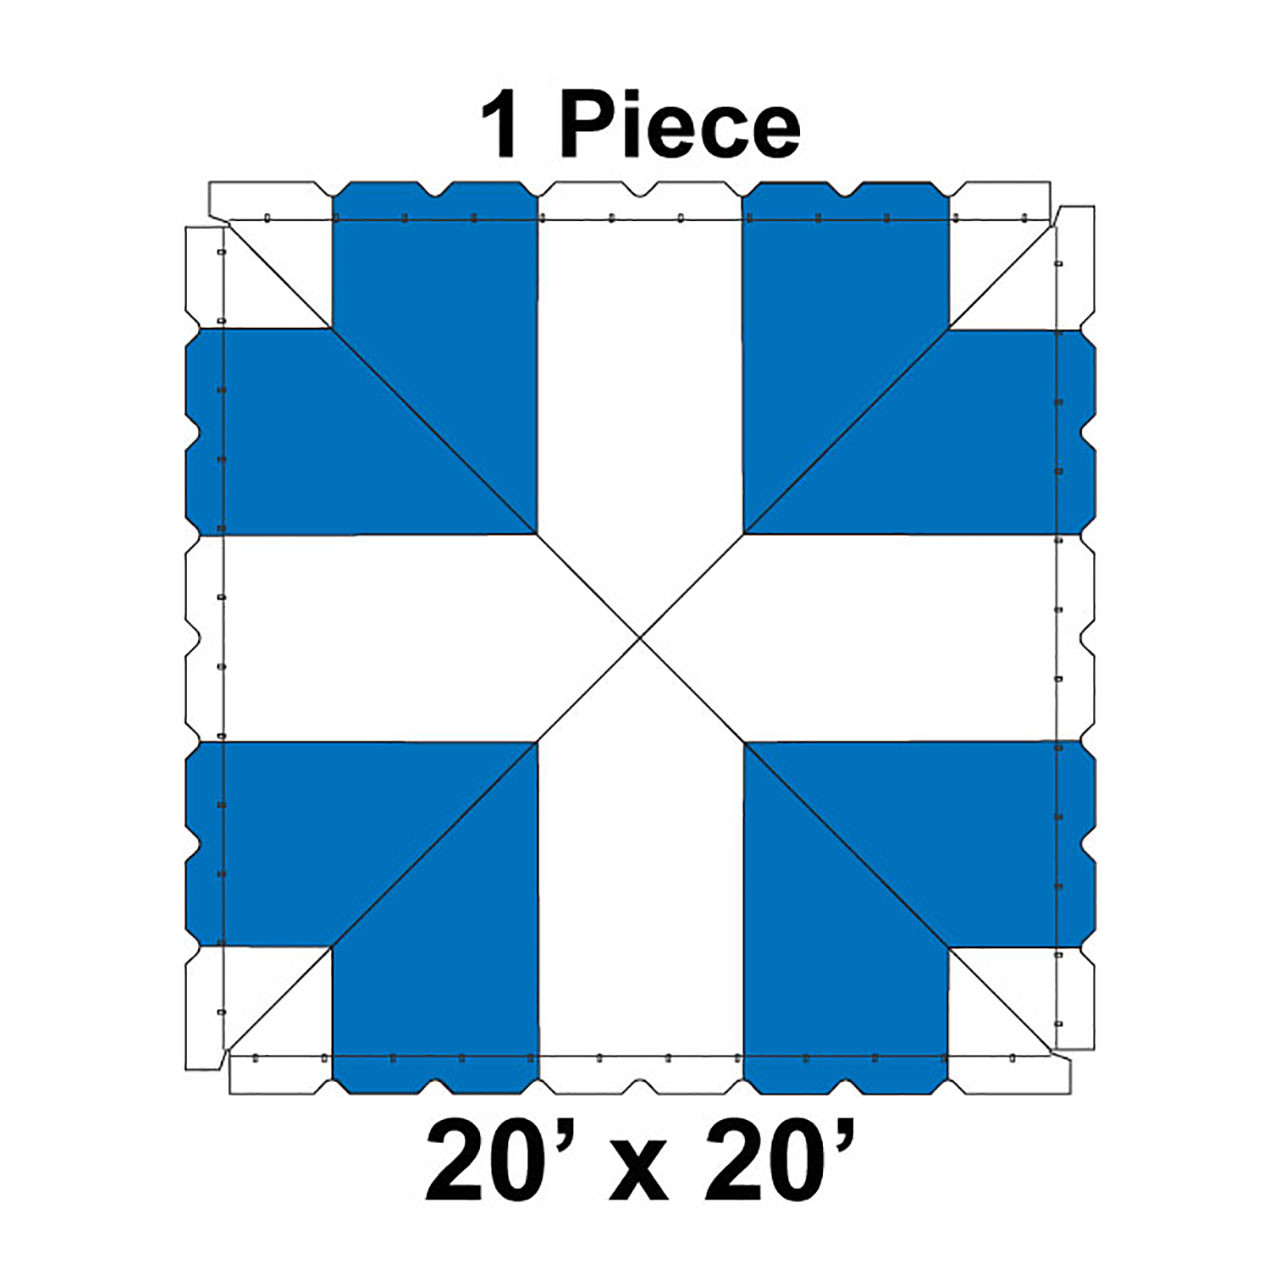 20' x 20' Classic Frame Tent, 1 Piece, 16 oz. Ratchet Top, White and Blue